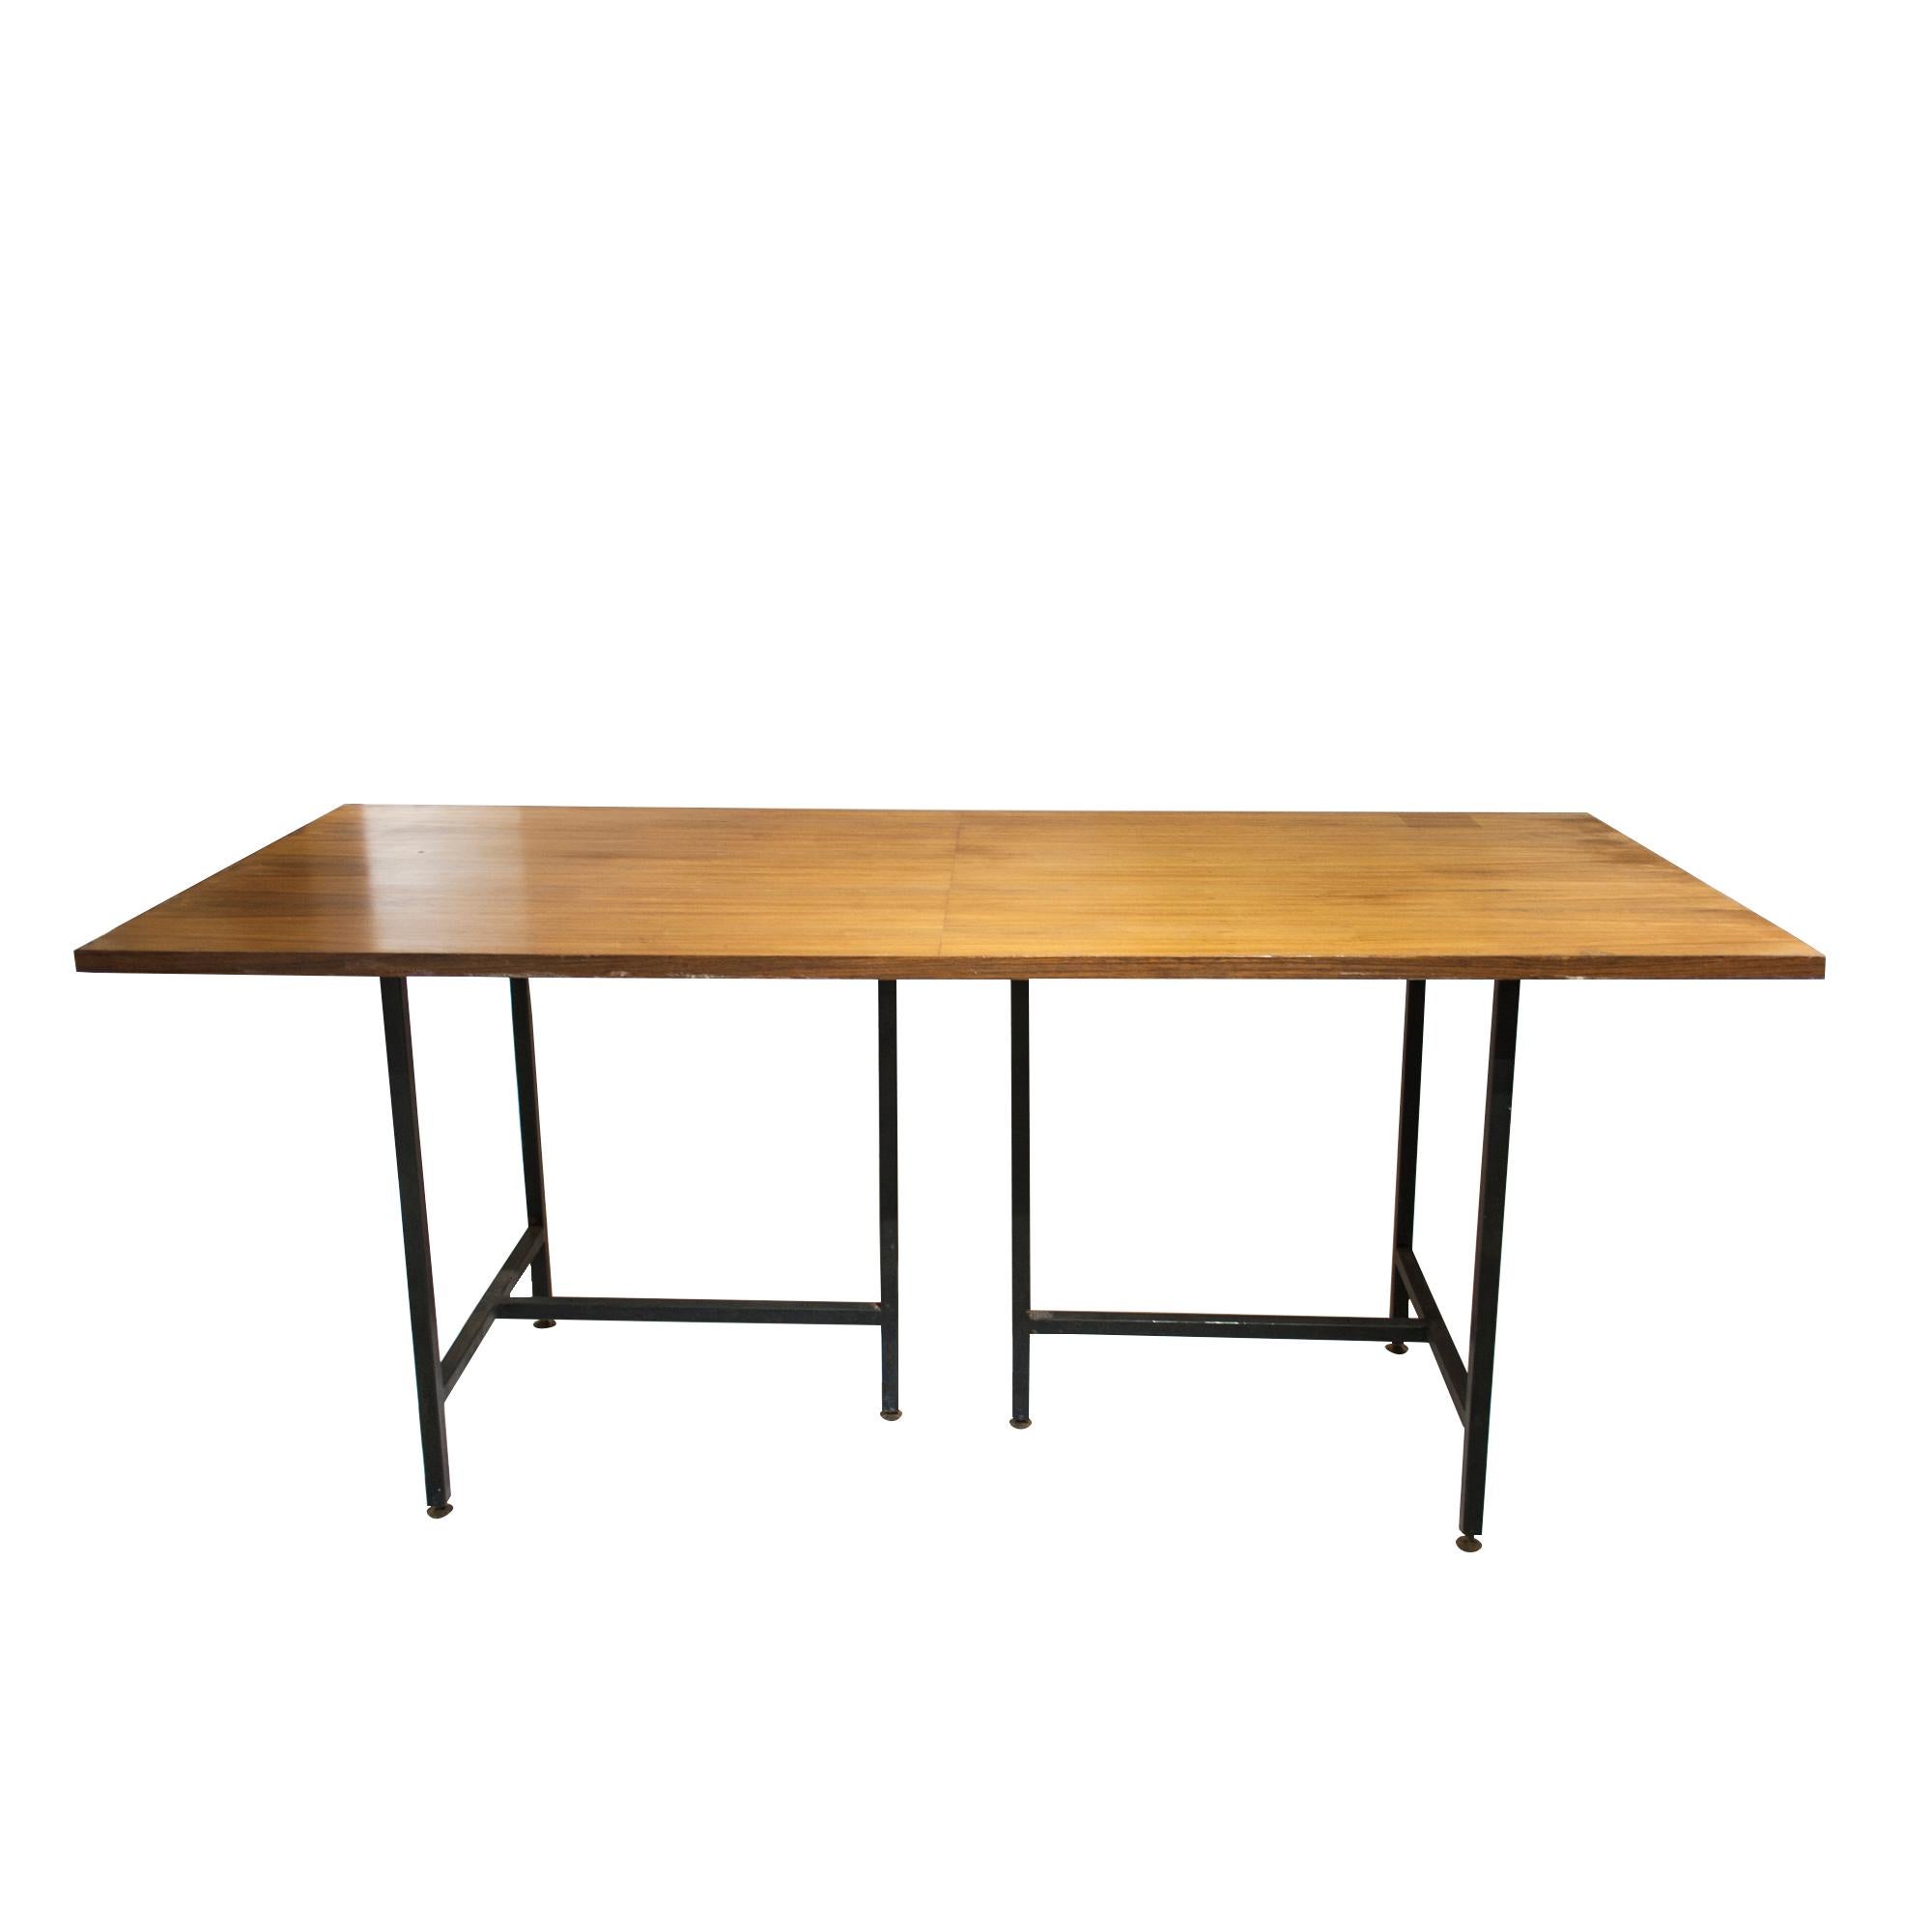 Mid- century modern Italian teak wooden desk with black lacquered iron base. The base consists of two independently moveable parts that can be modified according to the utilization of the desk. 

Dimensions: 180 x 80 x76 (H).

